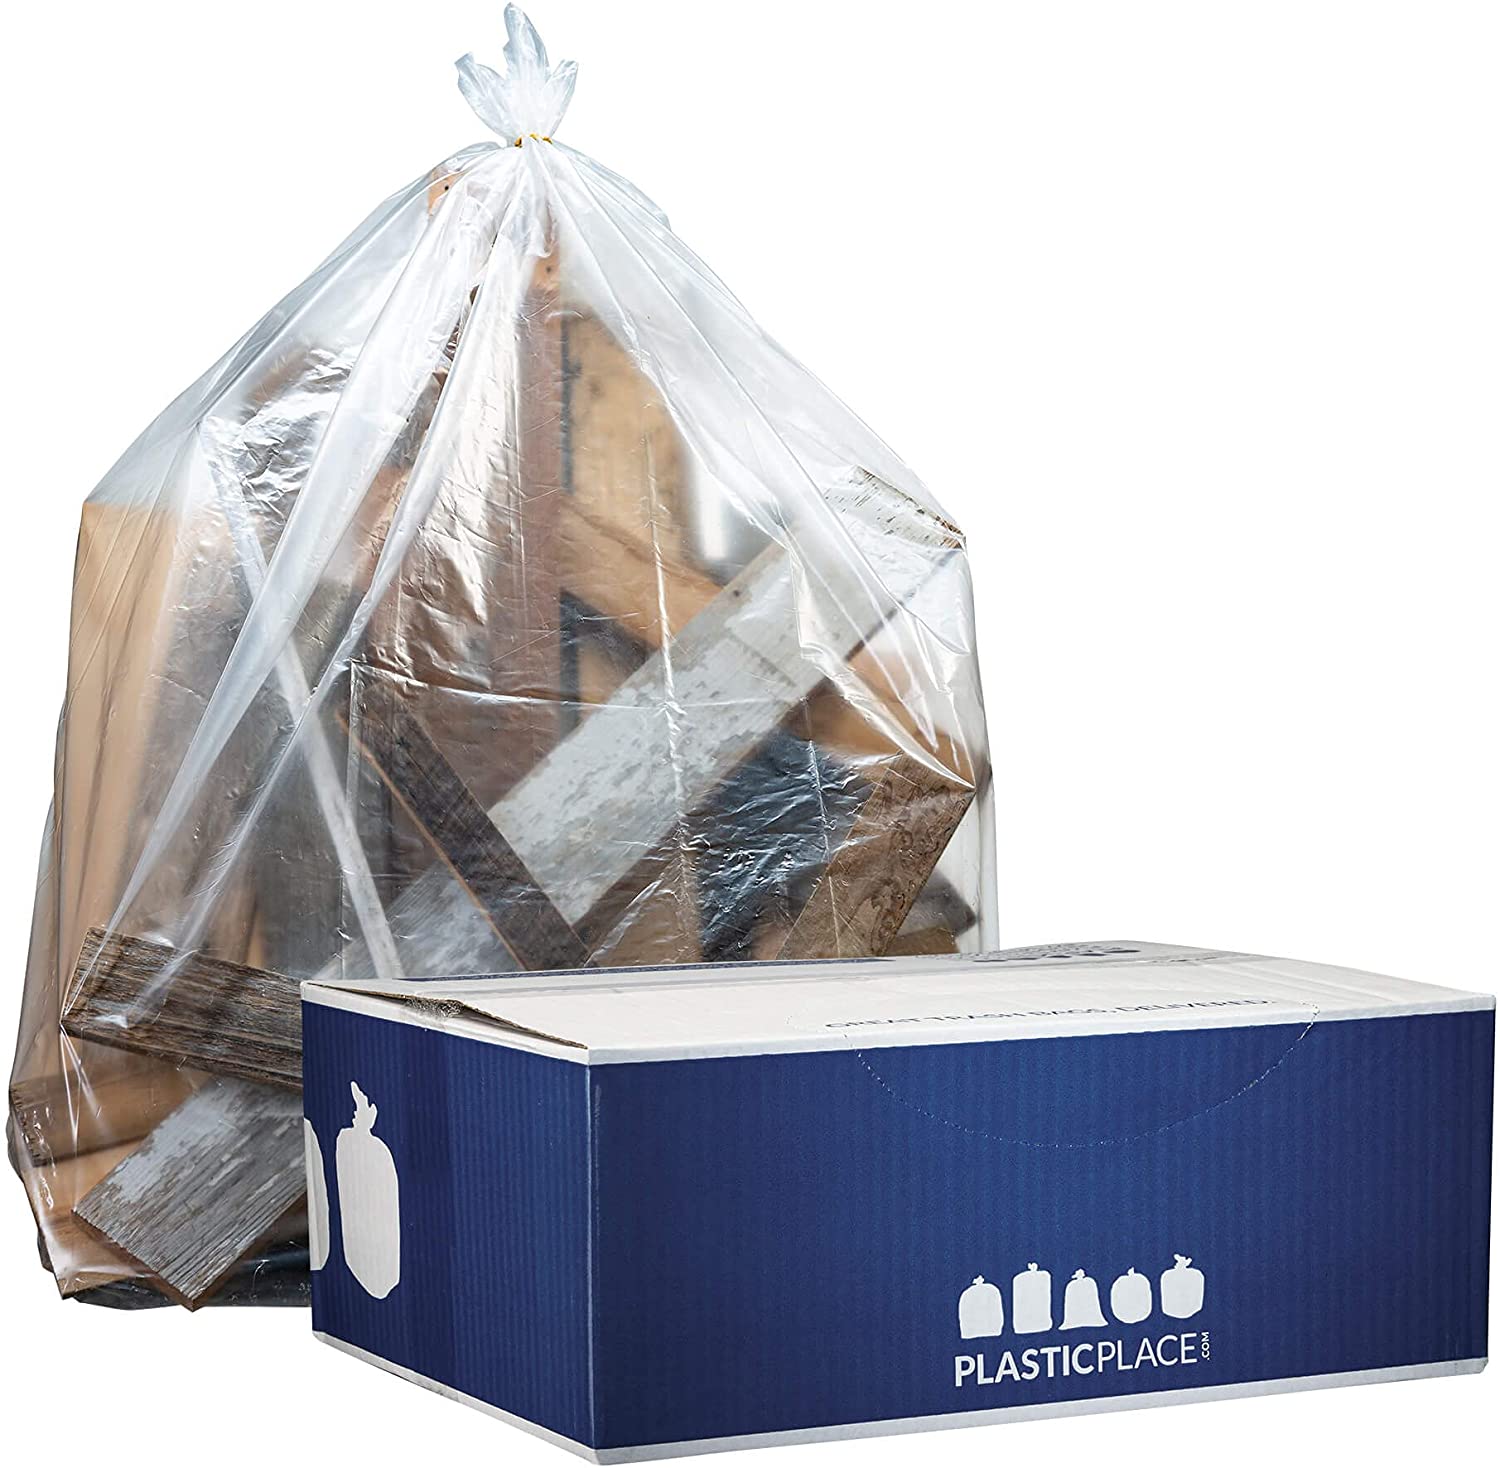 50 Count Plasticplace Contractor Trash Bags 55-60 gallon │ 3.0 Mil │ Clear Heavy Duty Garbage Bag │ 37.5” x 56.6” 